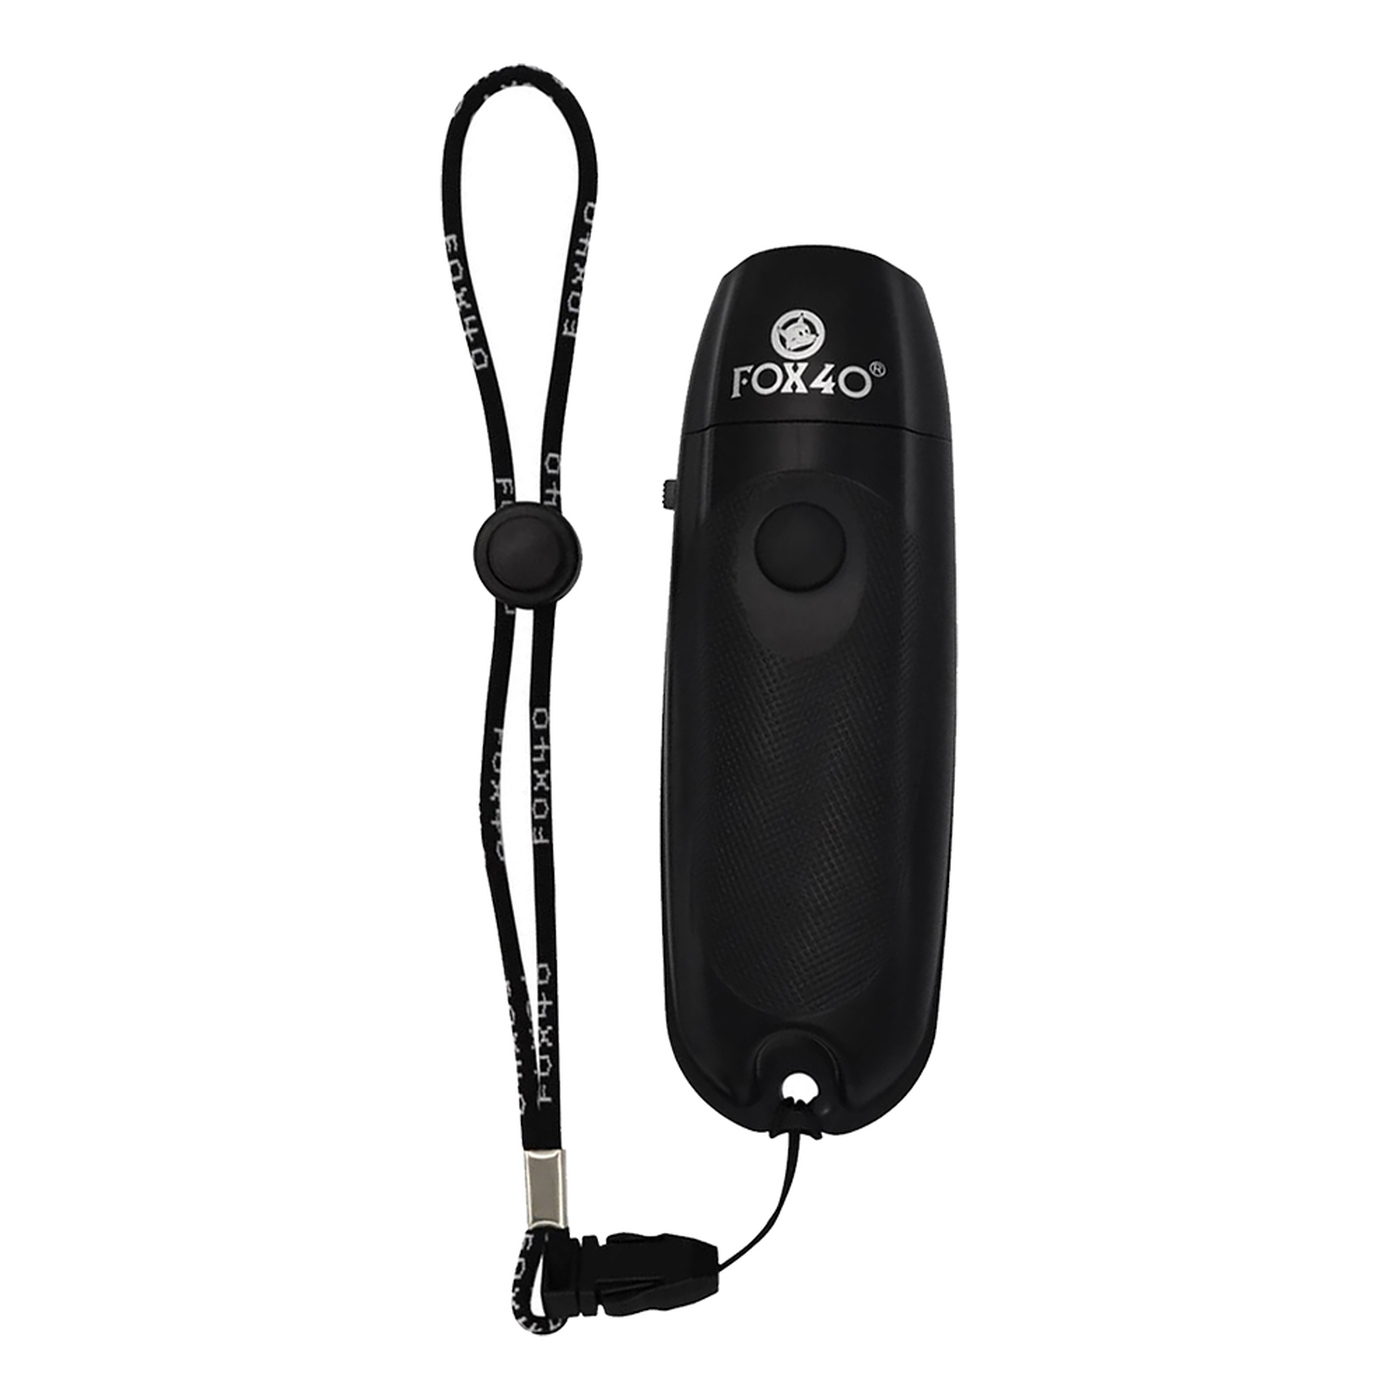 Fox 40 Electronic Whistle | Soccer Referee | Power Play Sports